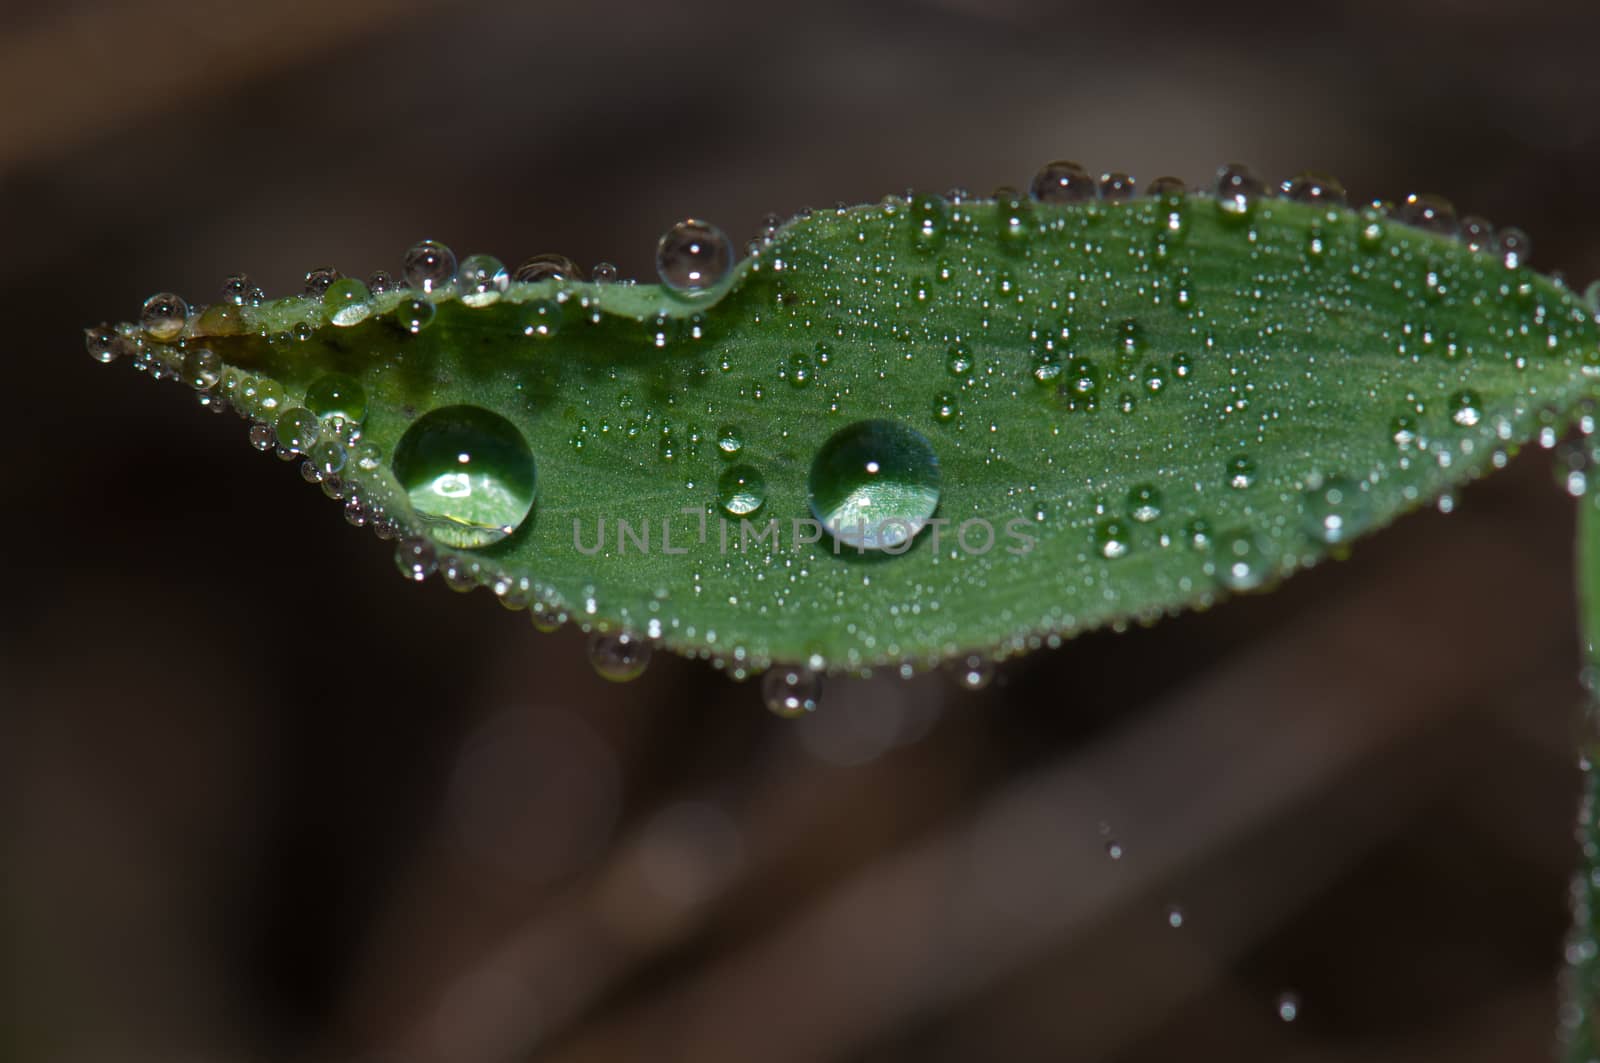 Leaf covered with dew drops. by VictorSuarez